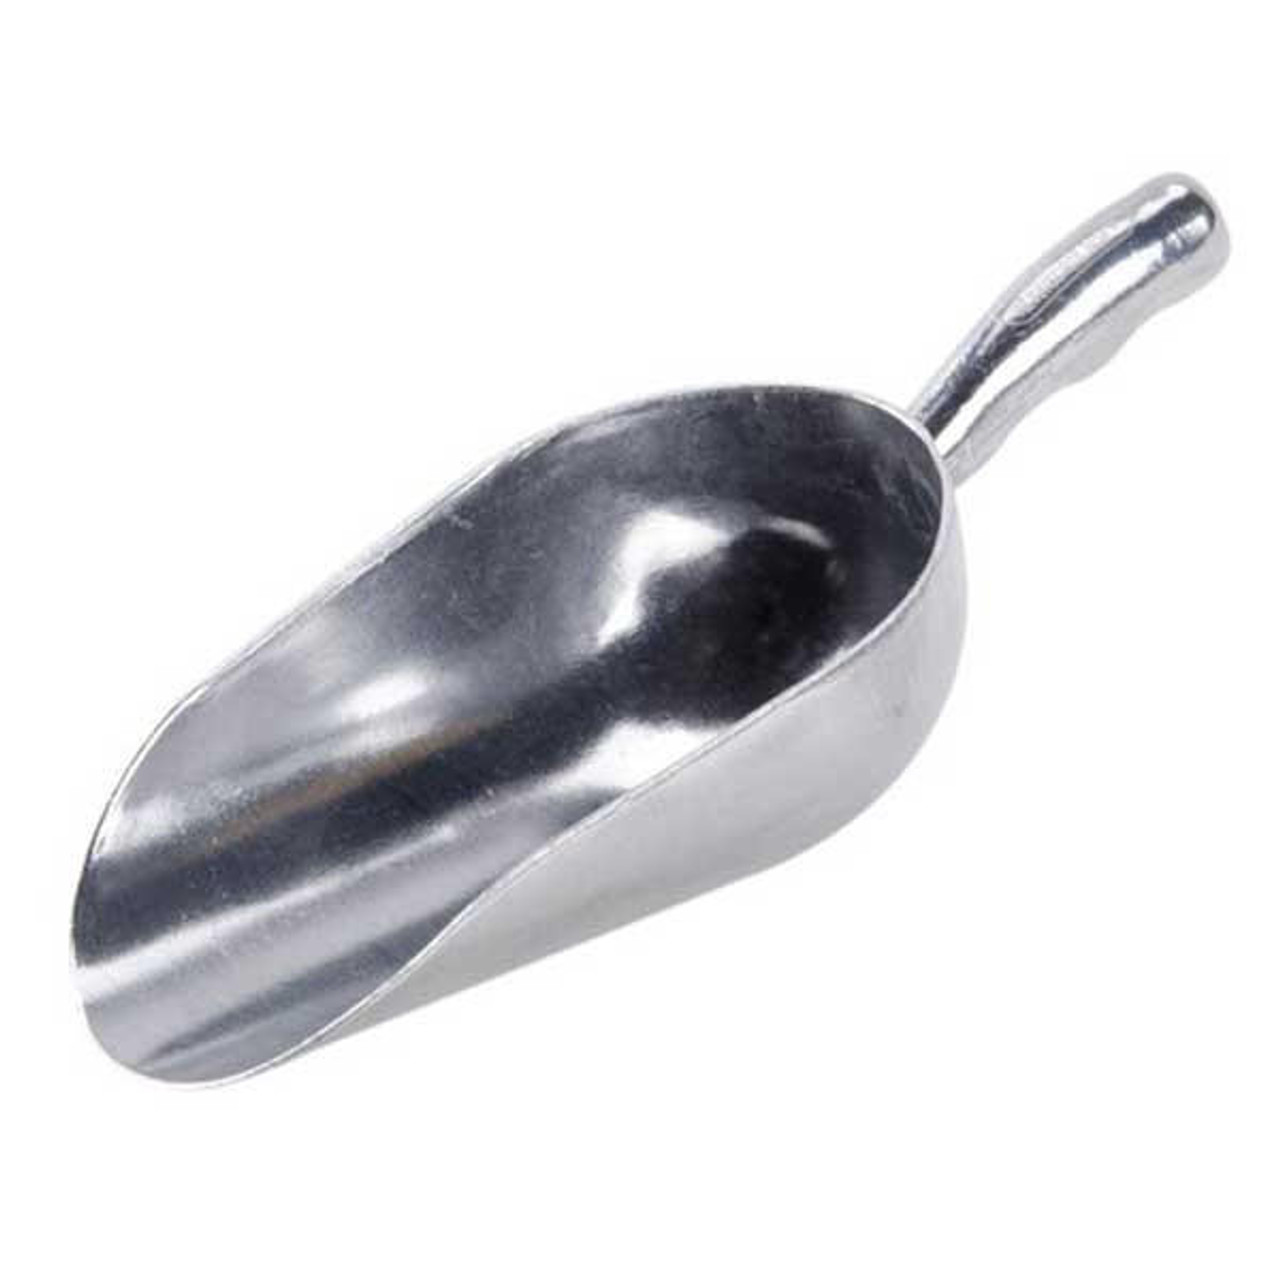 Ice Cream Scoop Large Stainless Steel Cylinder Dual Purpose